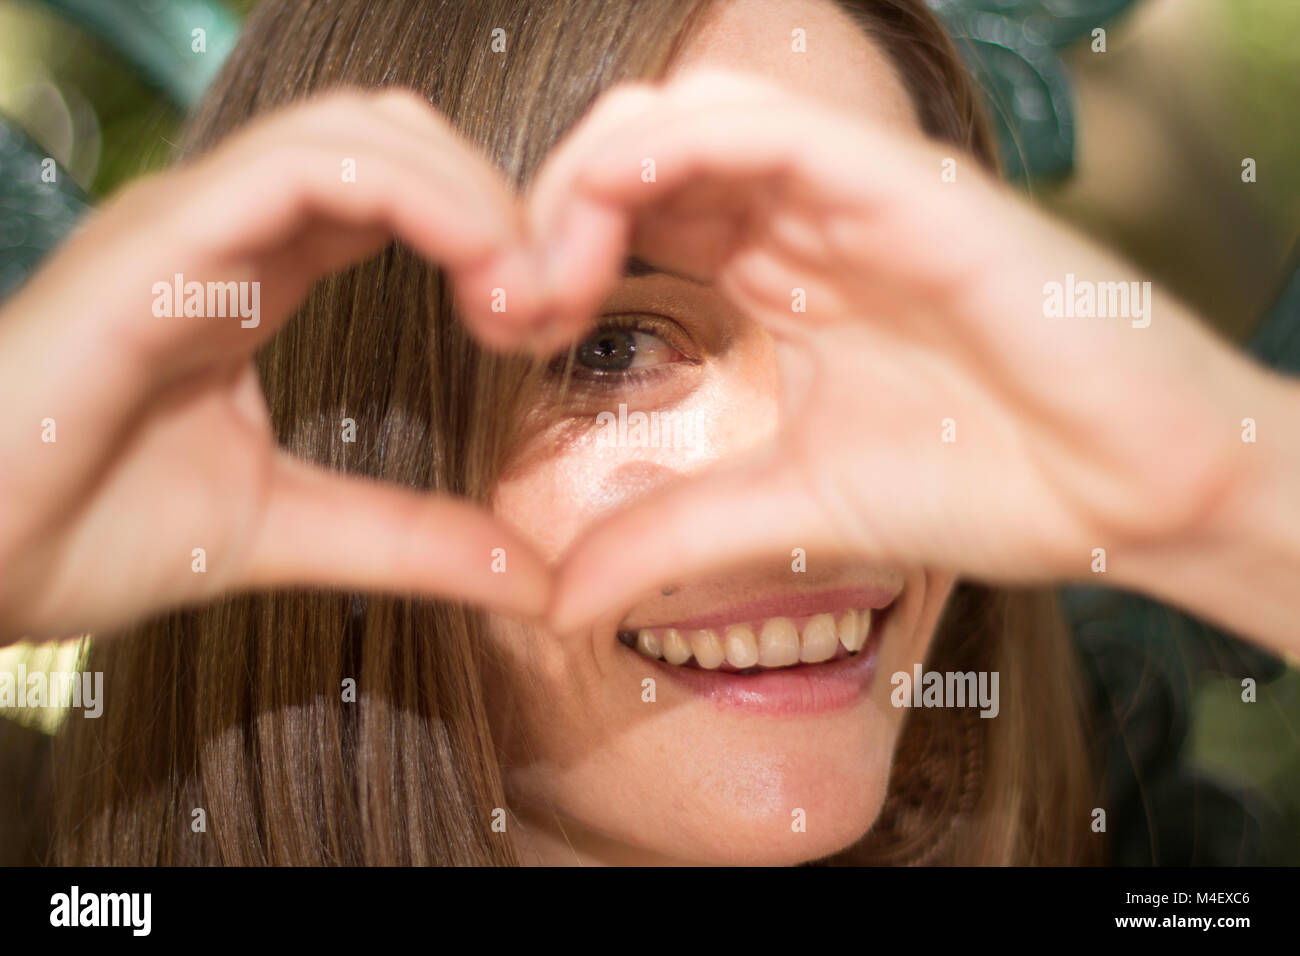 Female playing a game of peak a boo through a heart shape made with her hands Stock Photo